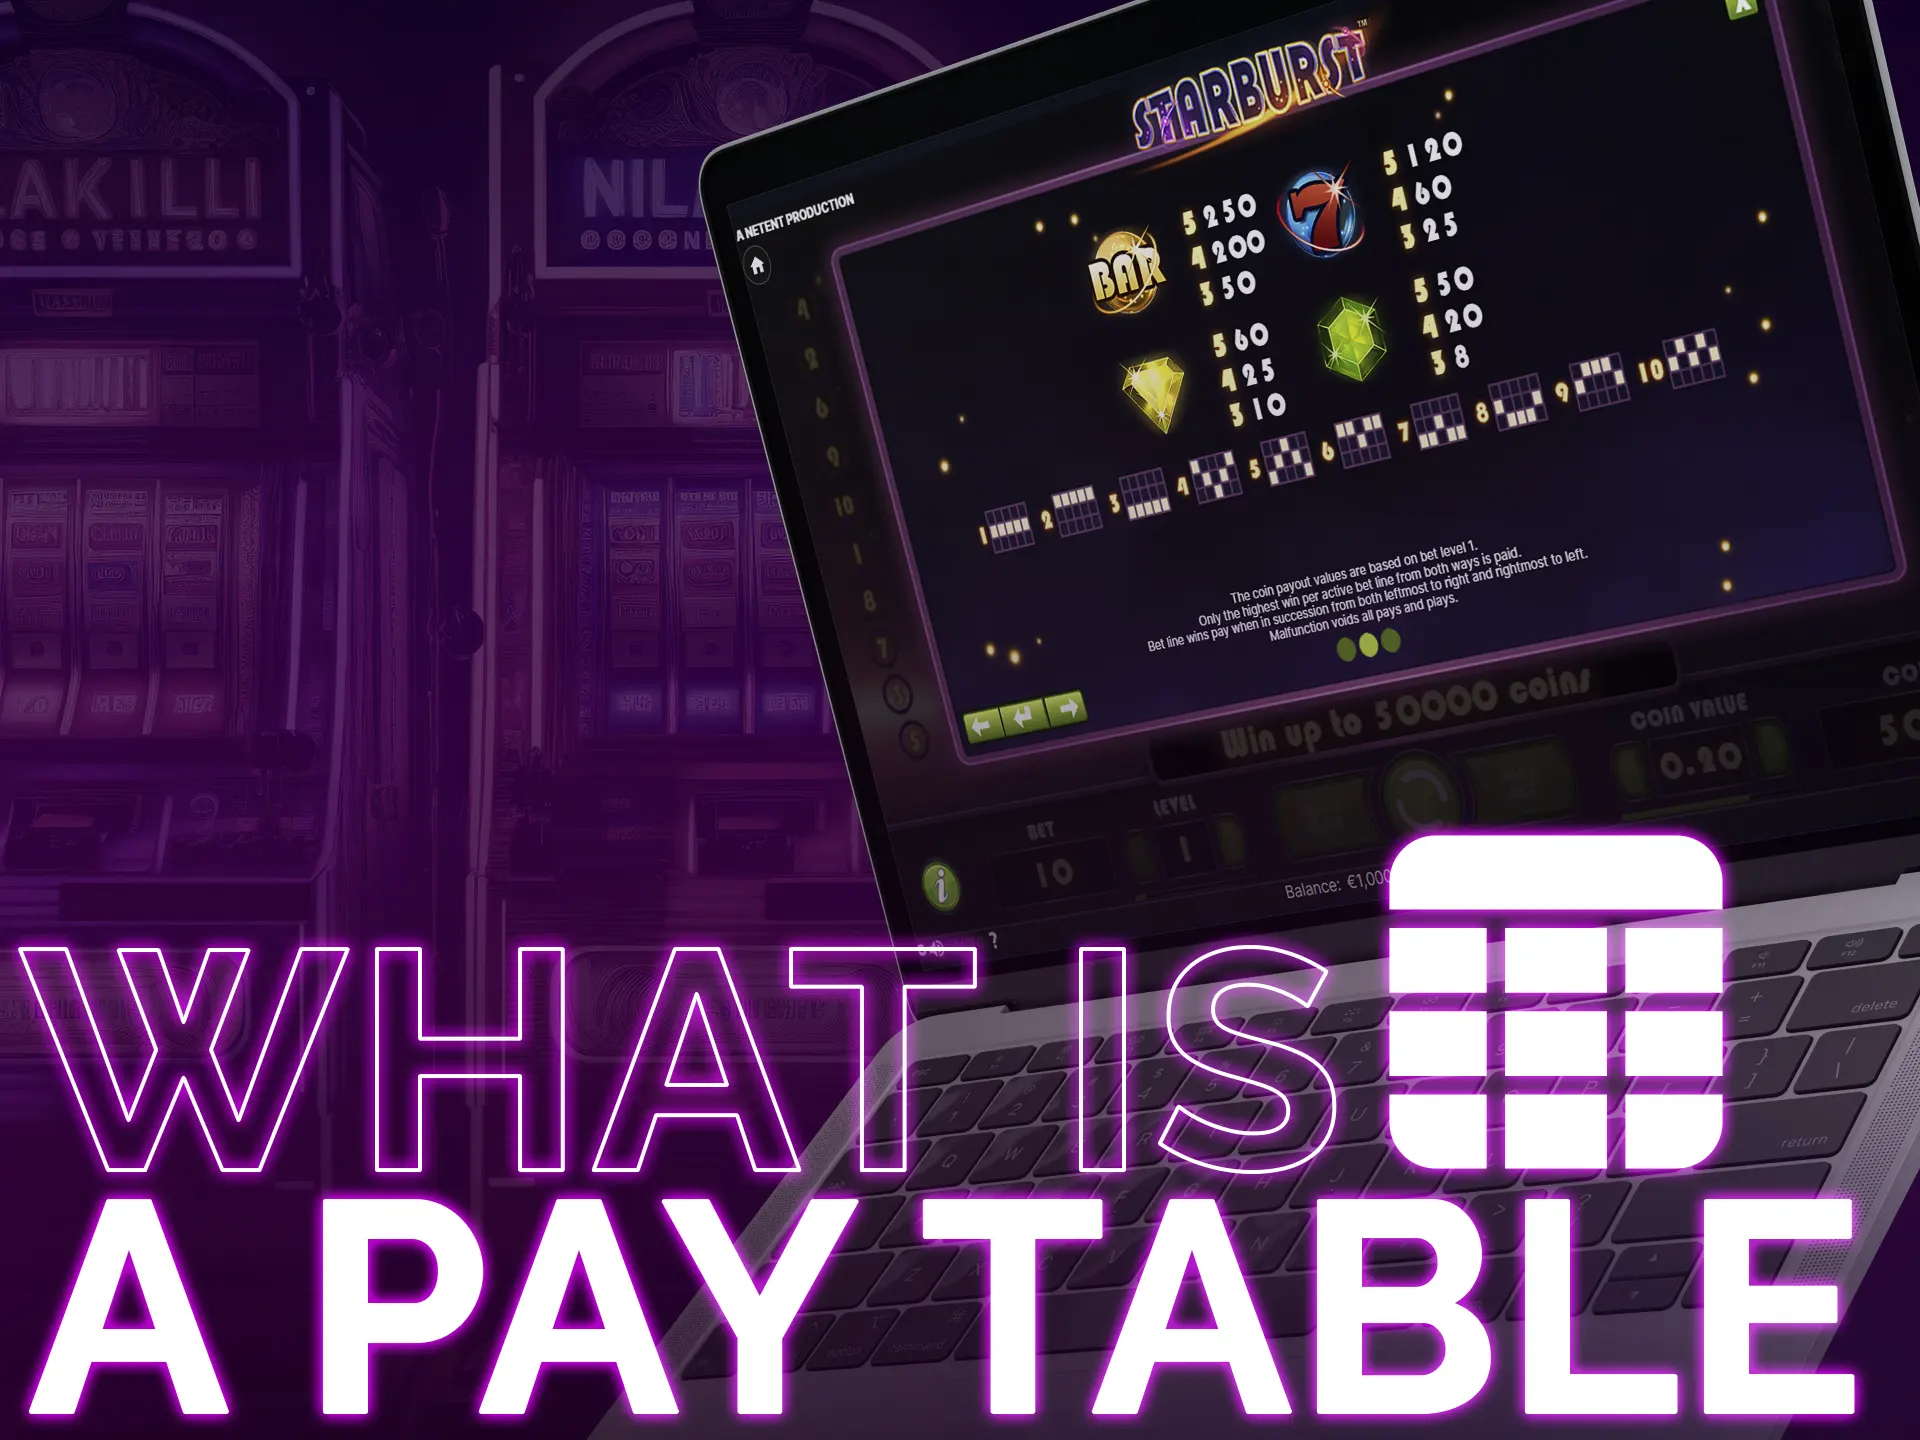 Pay table in slots explains game rules, symbols, and payouts.